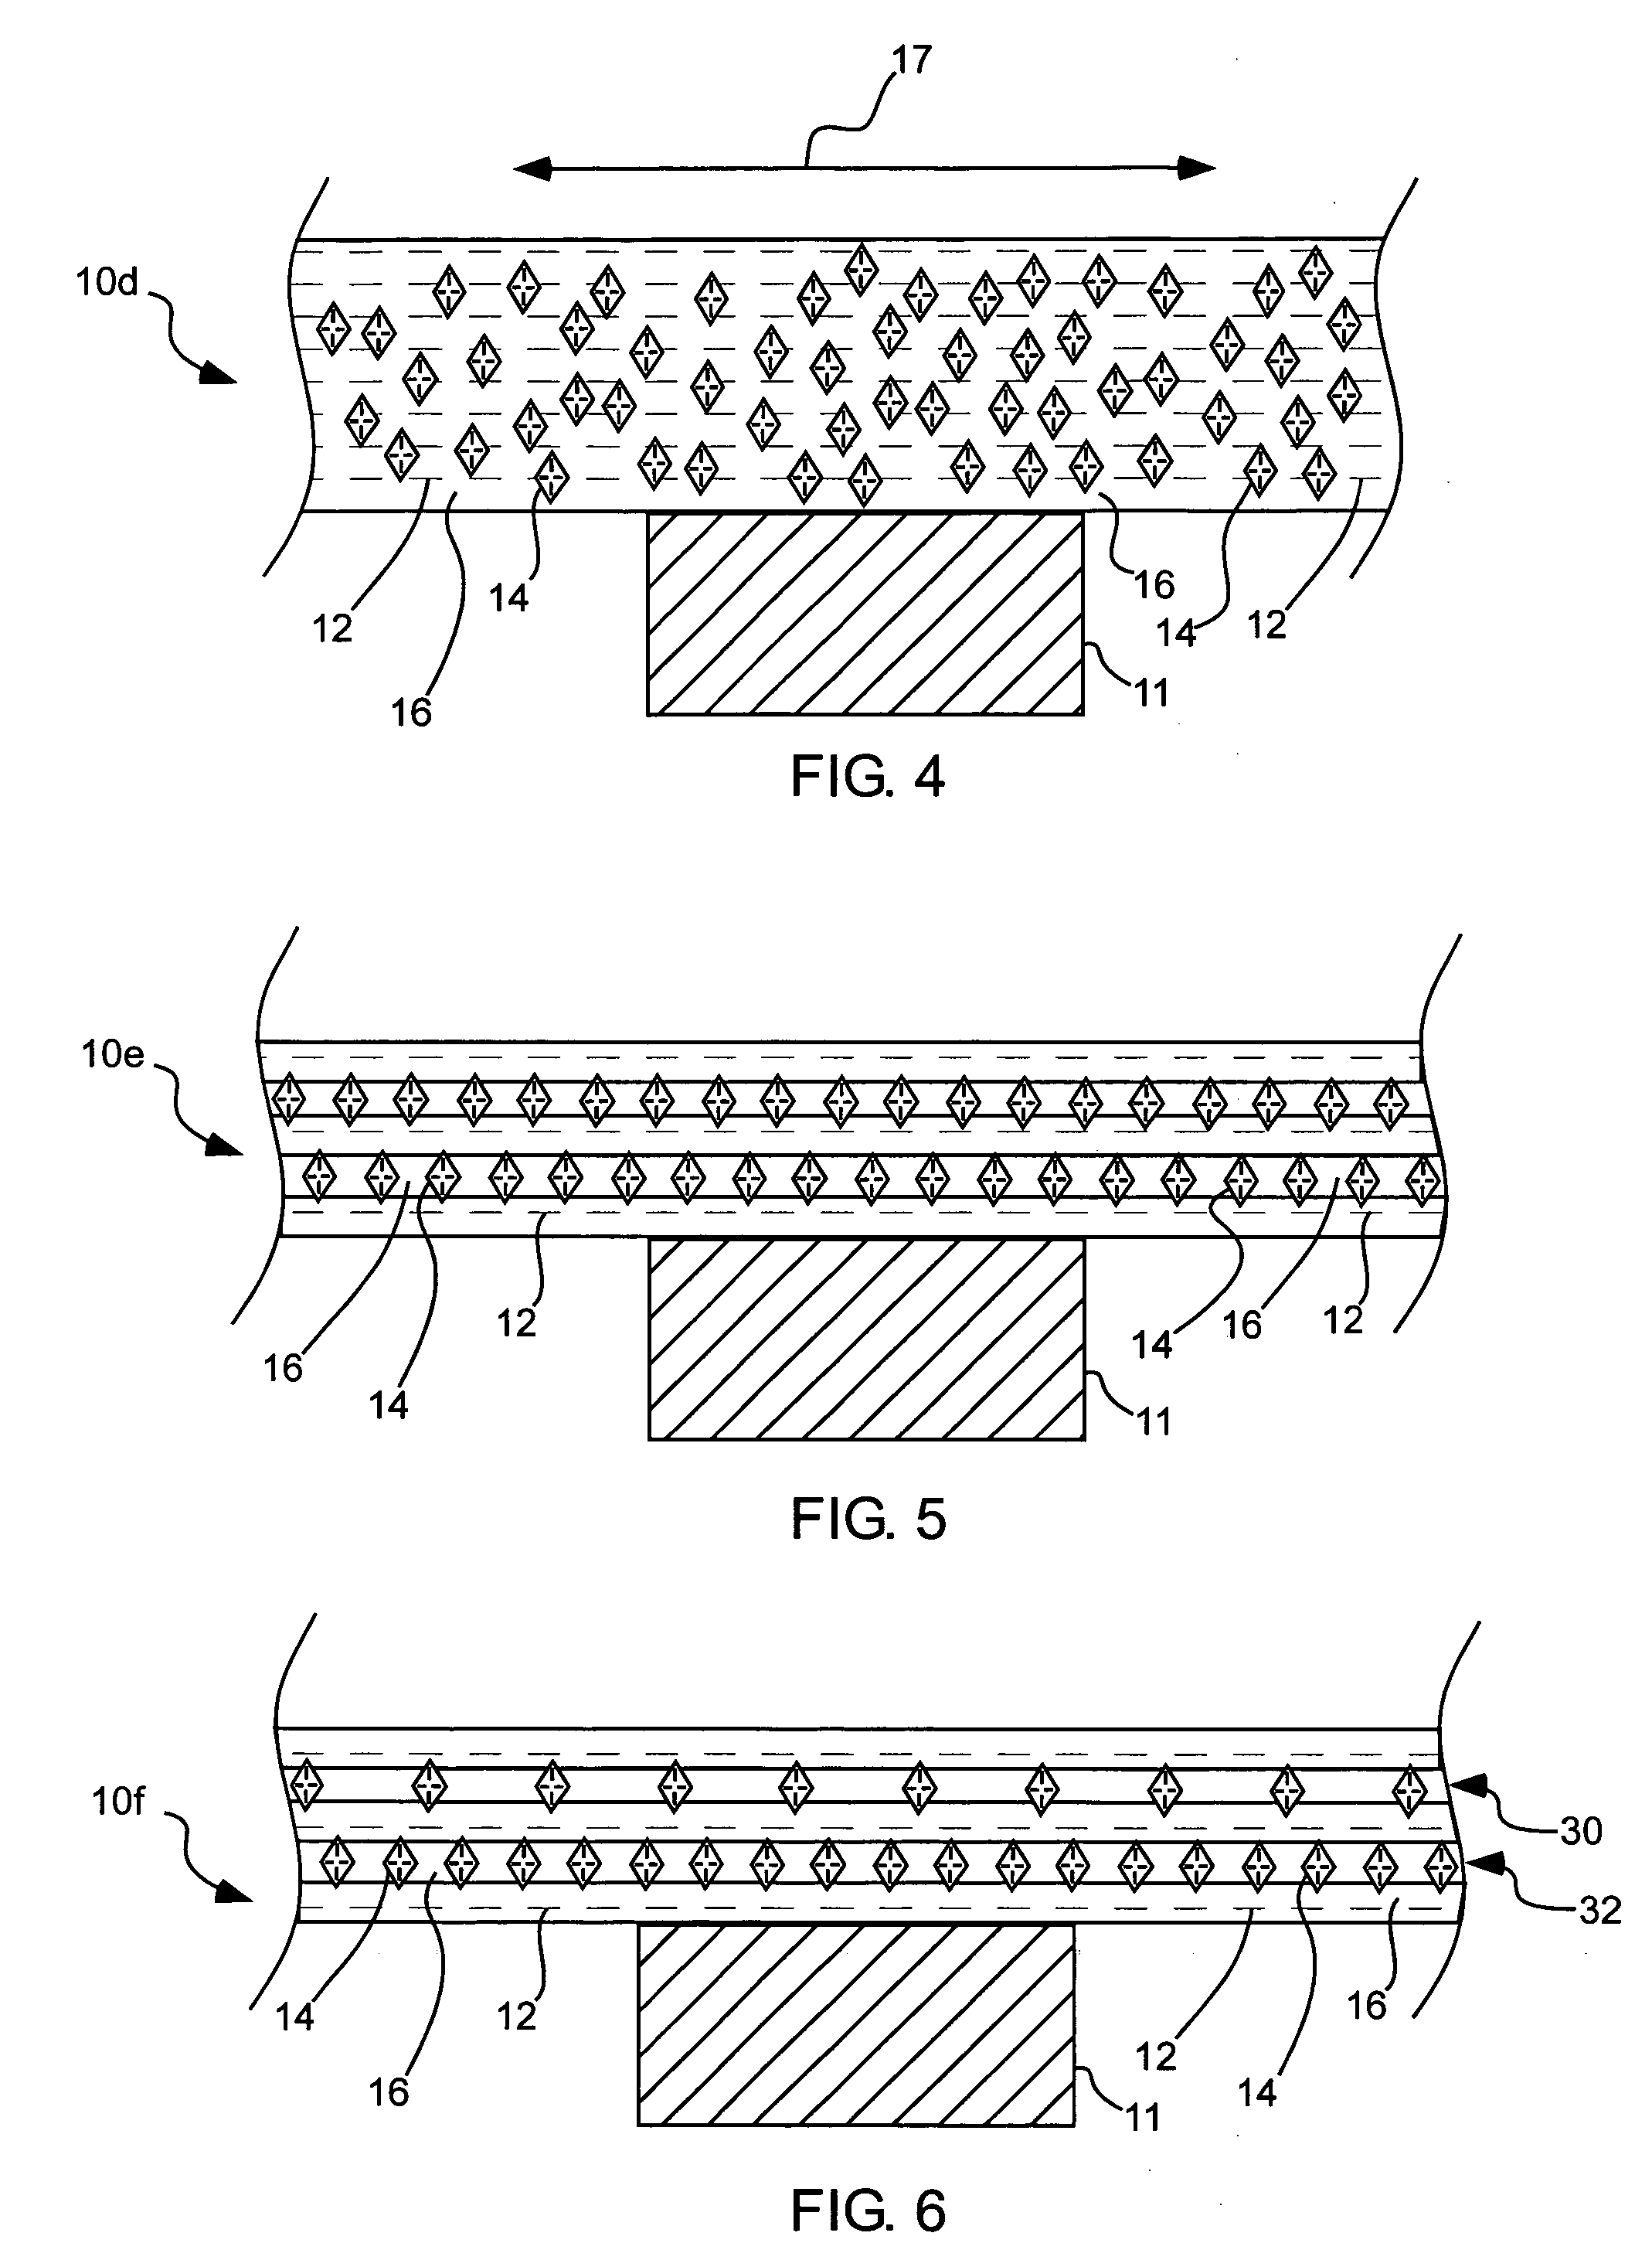 Carbonaceous composite heat spreader and associated methods